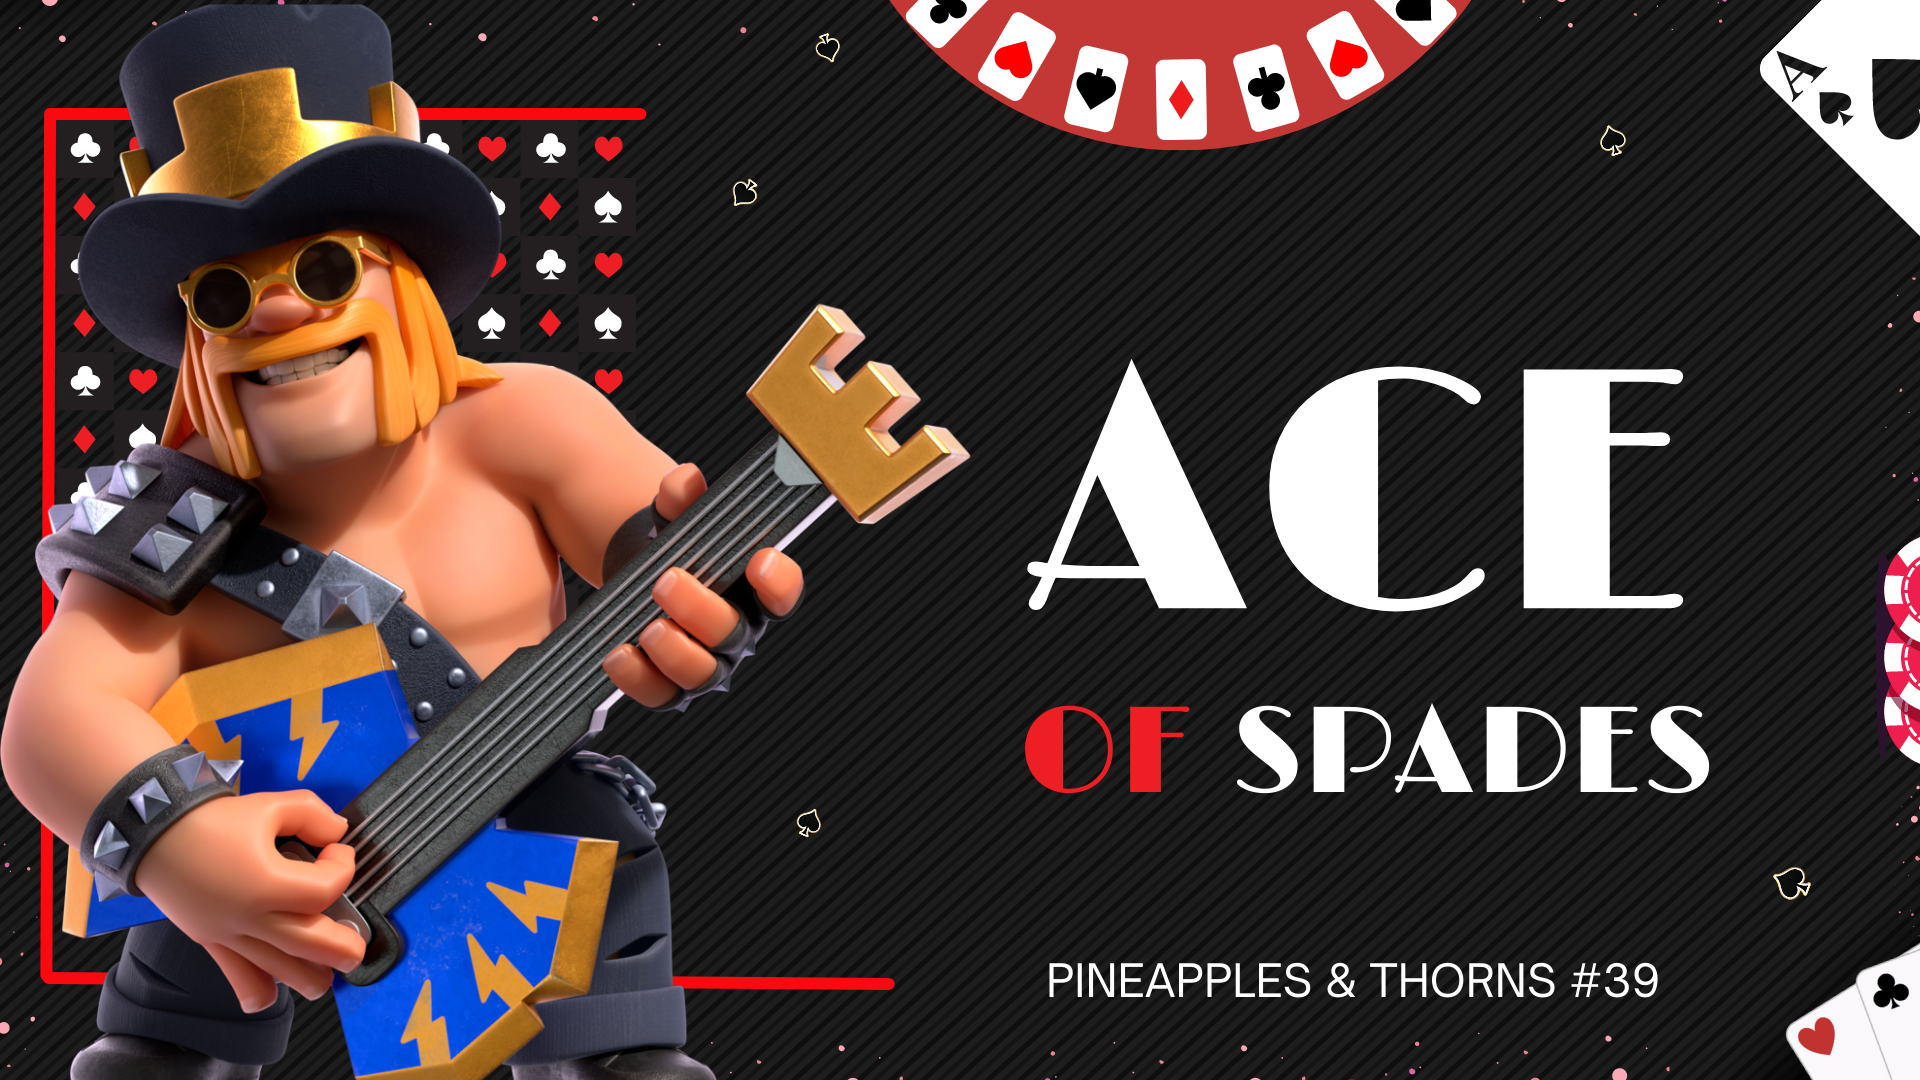 Ace of Spades (Pineapples & Thorns Clash of Clans Podcast Episode 39)